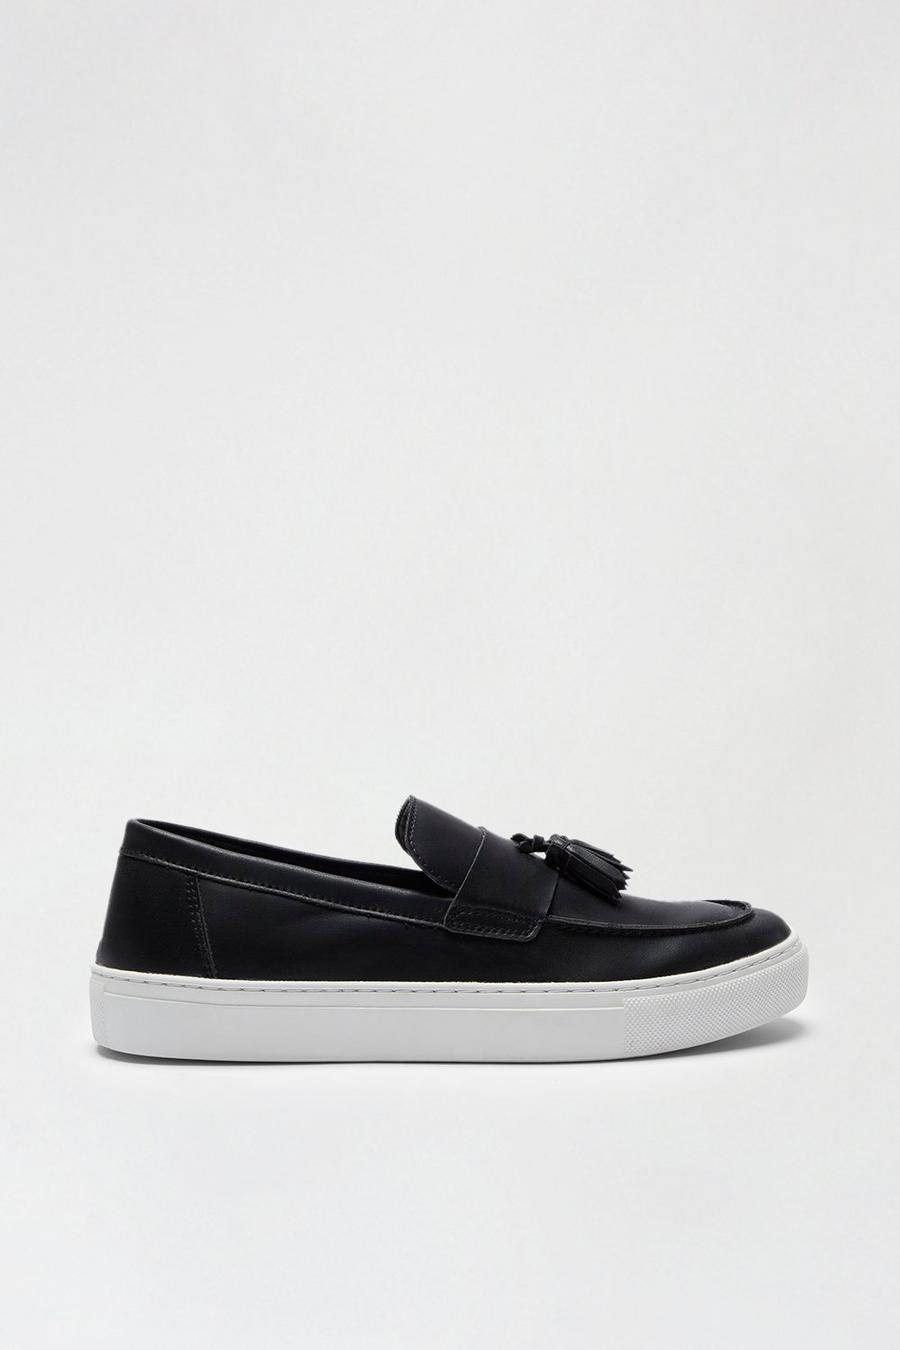 Slip On Shoes With Tassle Detail